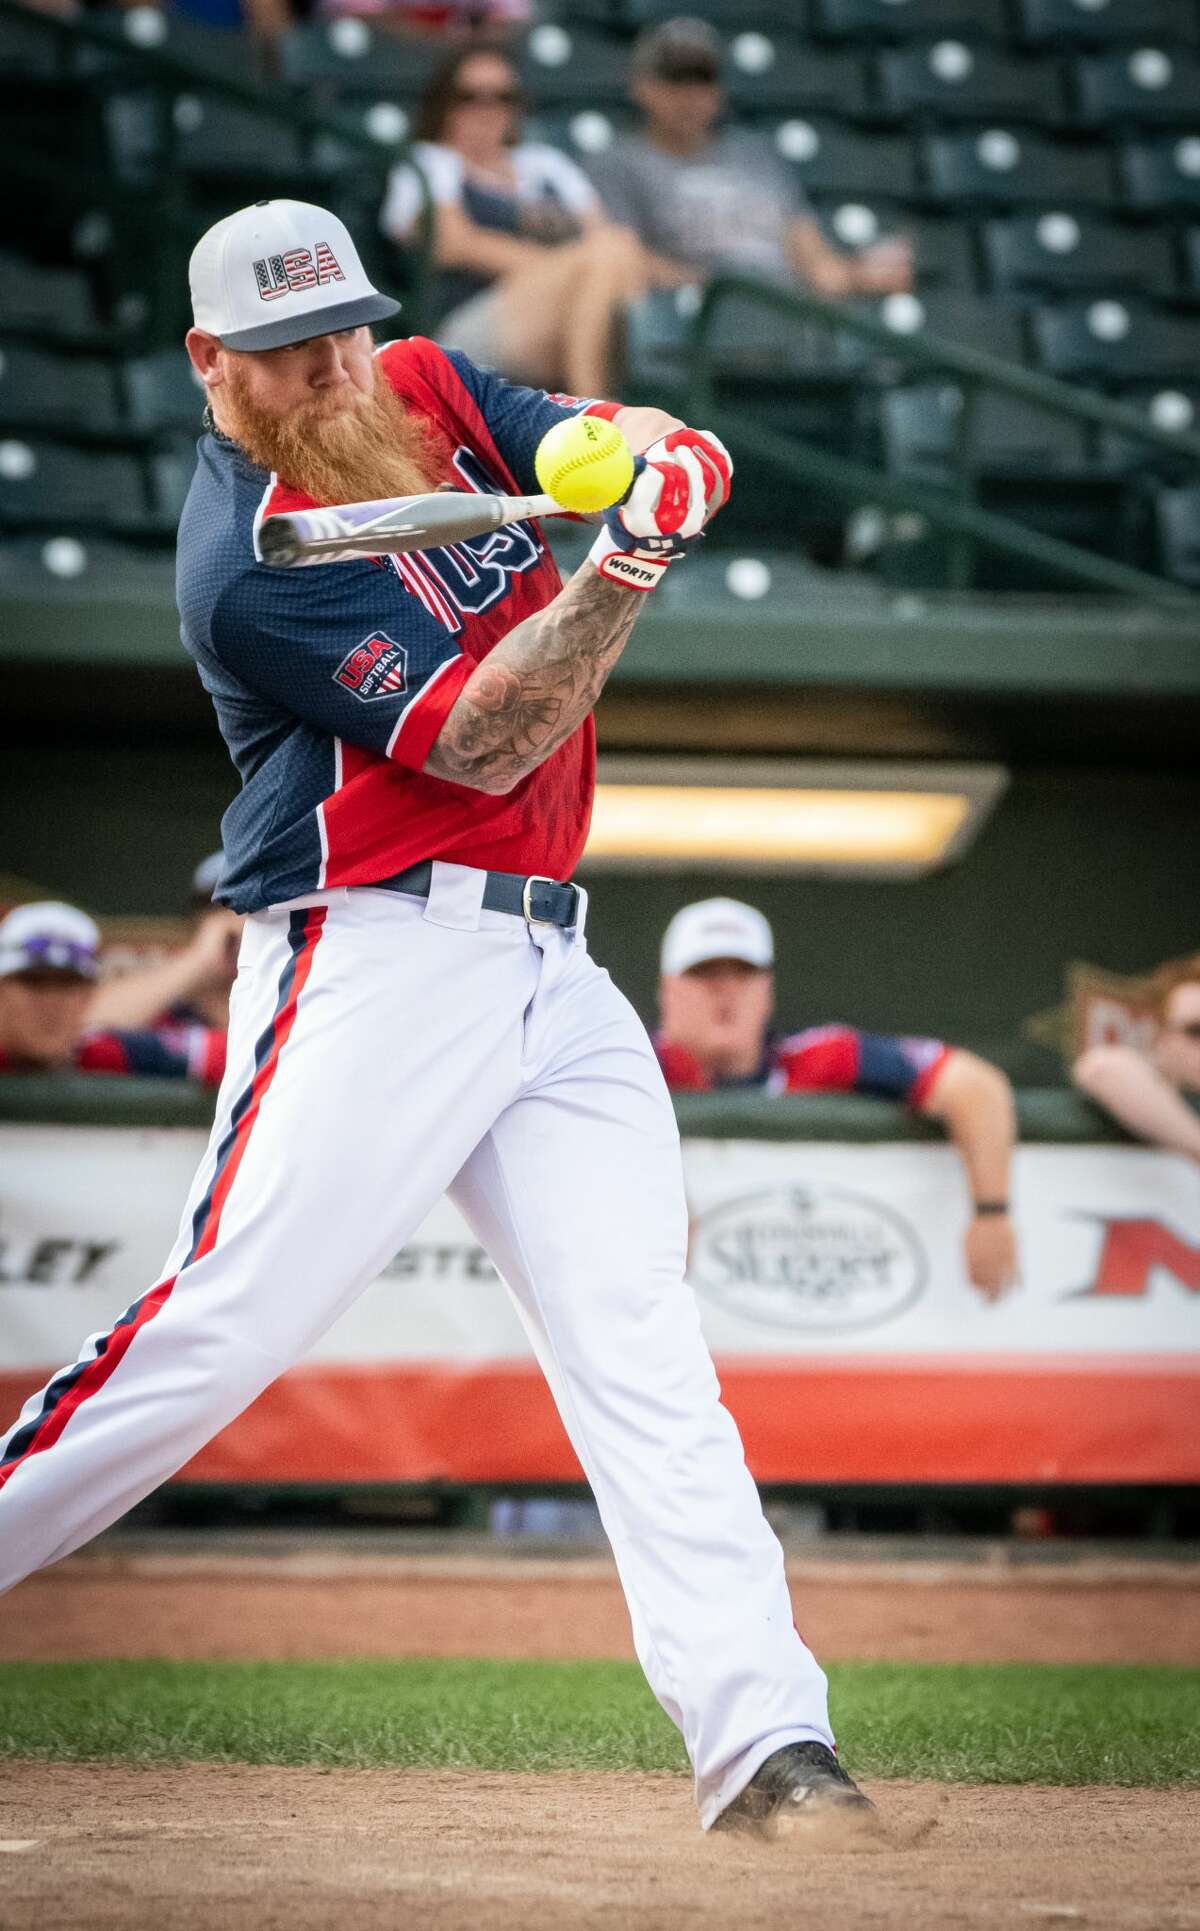 Ryan Harvey of team USA swings on a pitch during a game against Canada in the Border Battle XI at Dow Diamond Saturday, July 27, 2019. (Steven Simpkins/for the Daily News)